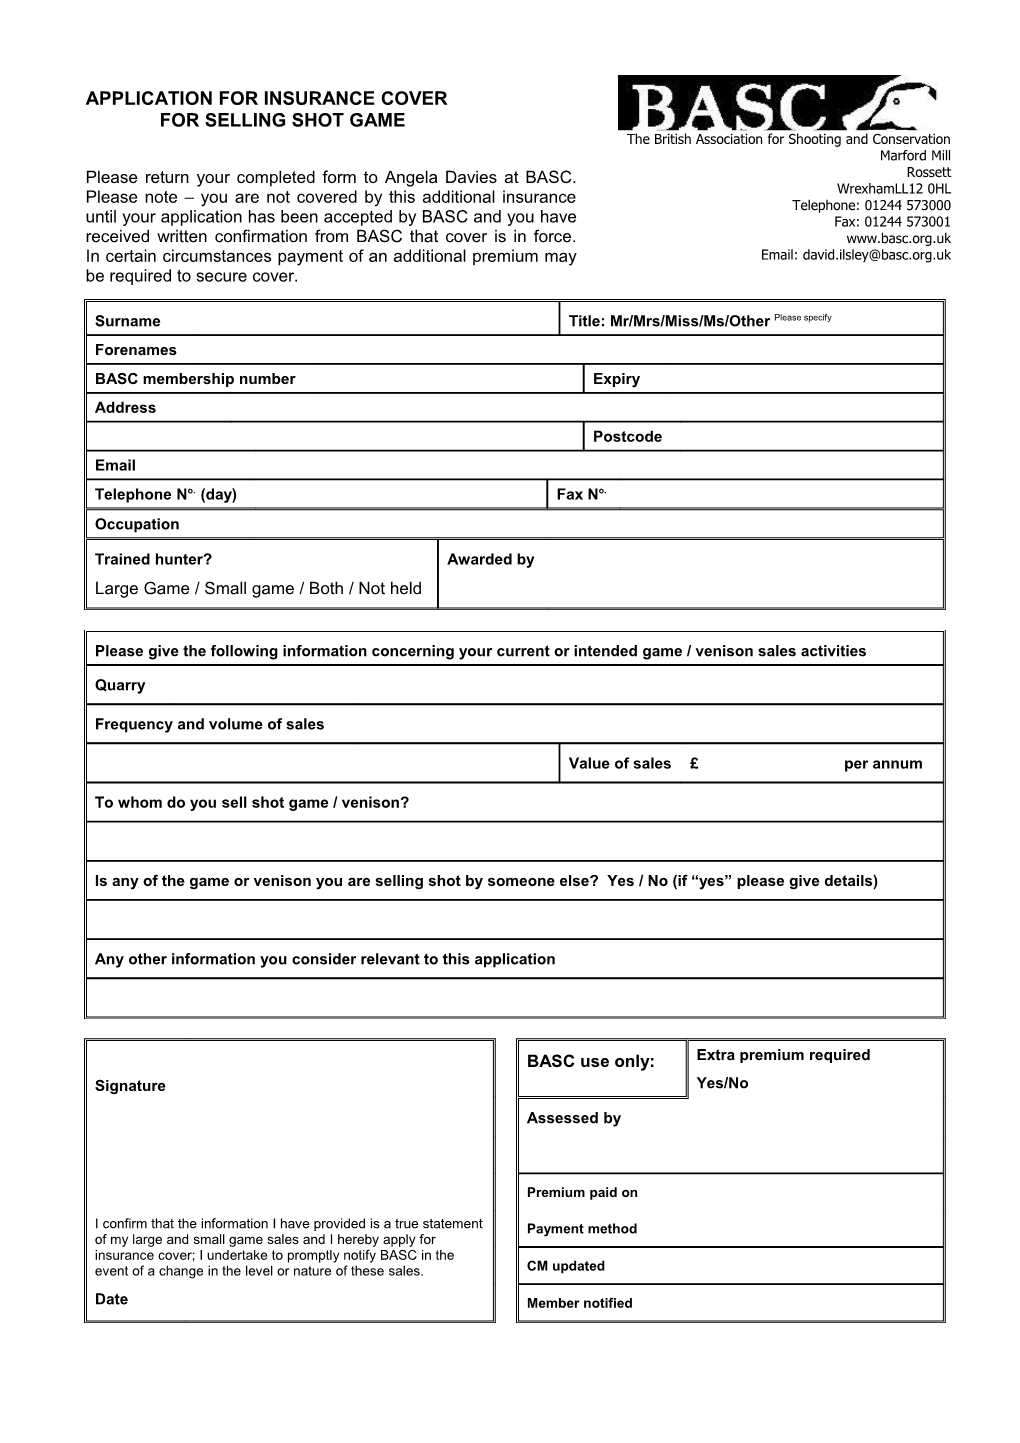 Application for Insurance Coverfor Selling Shot Game